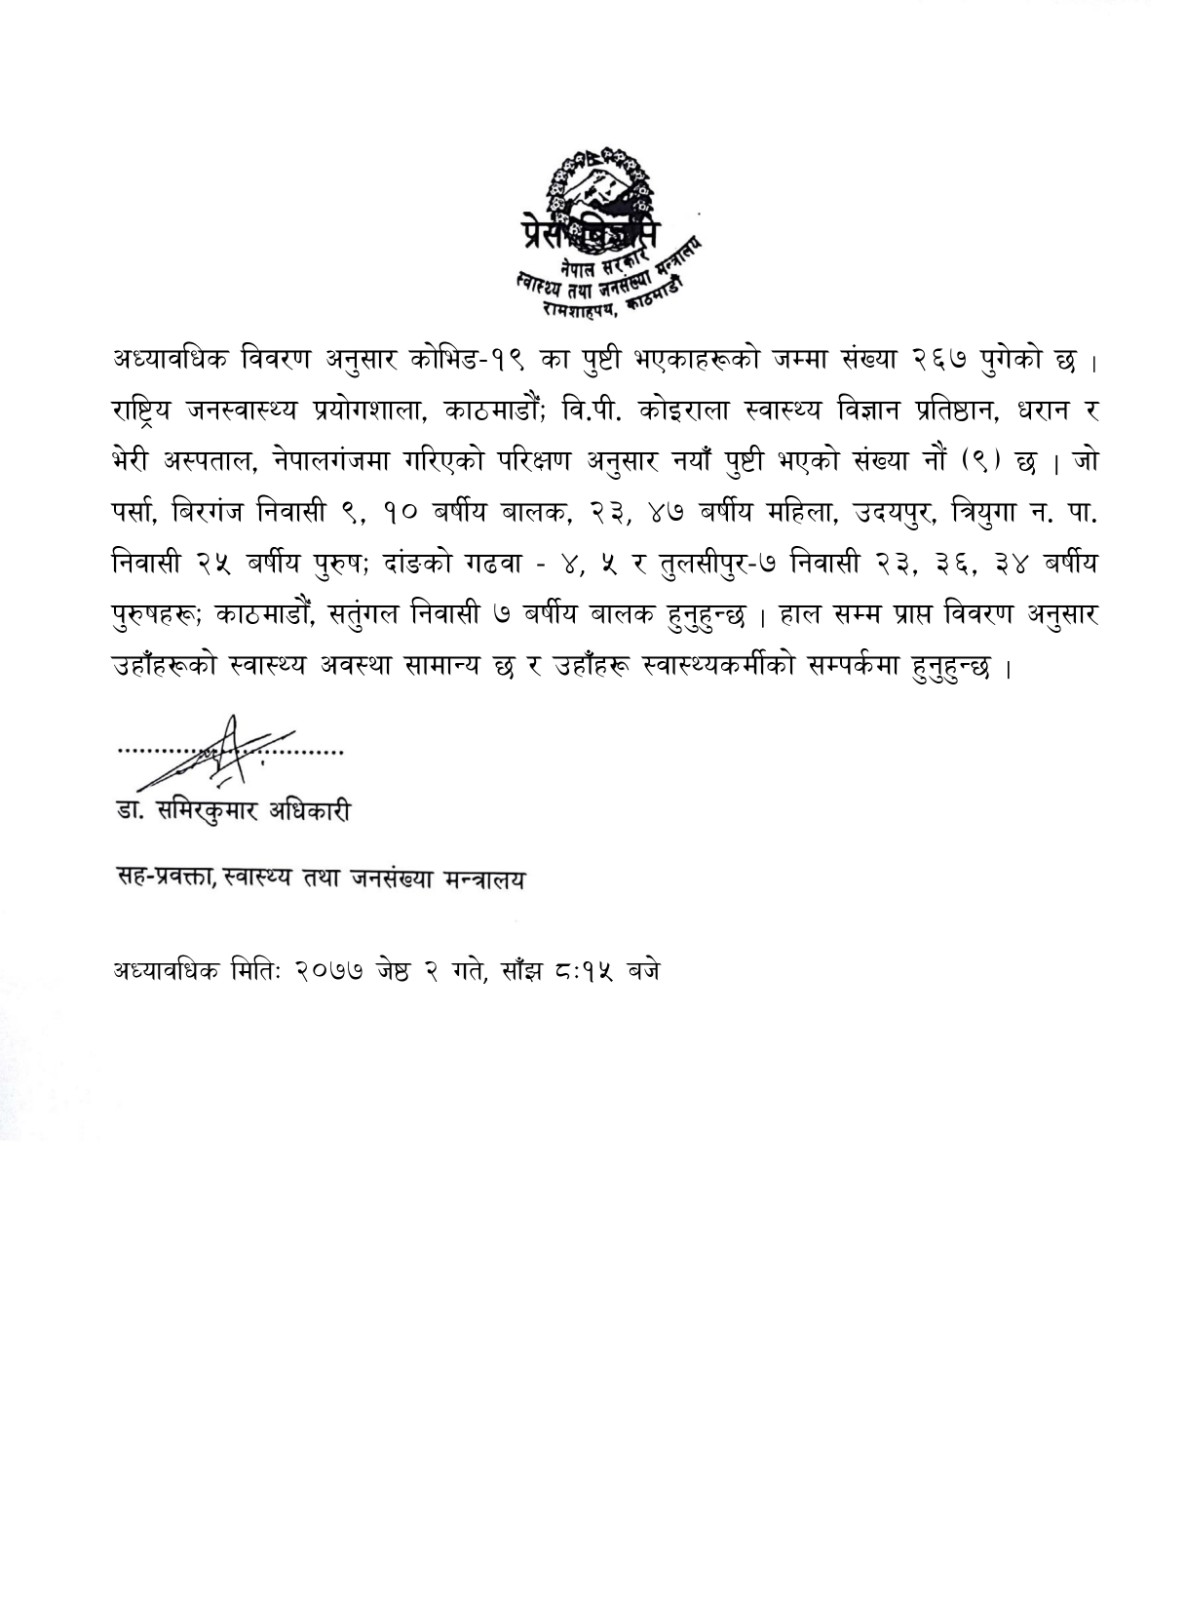 Press Release by MoHP.